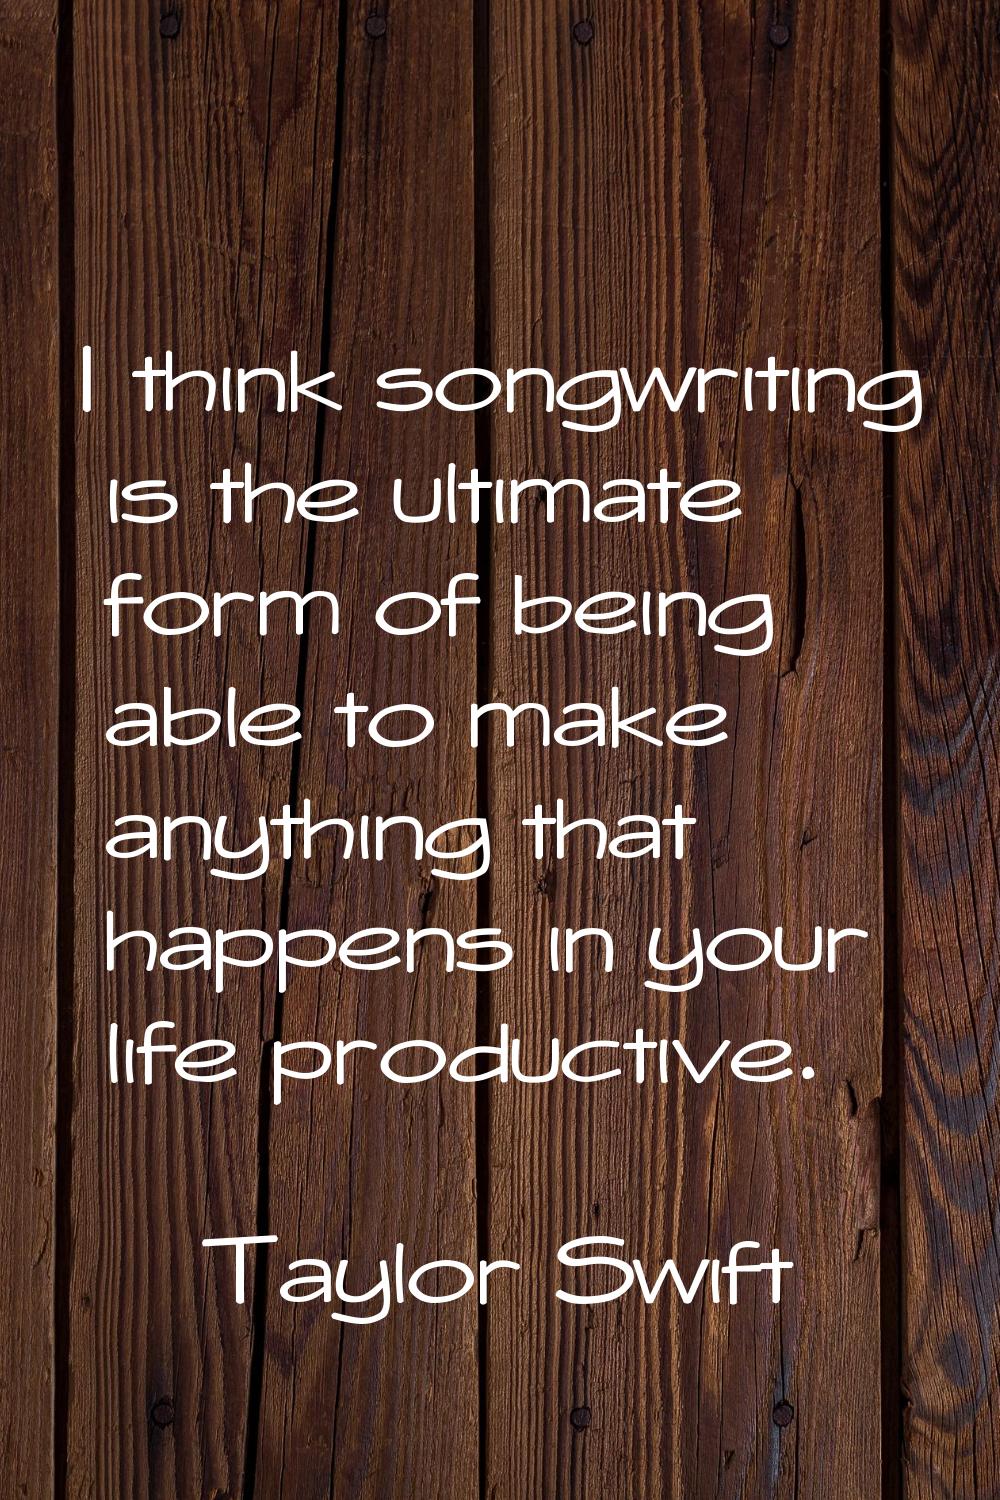 I think songwriting is the ultimate form of being able to make anything that happens in your life p